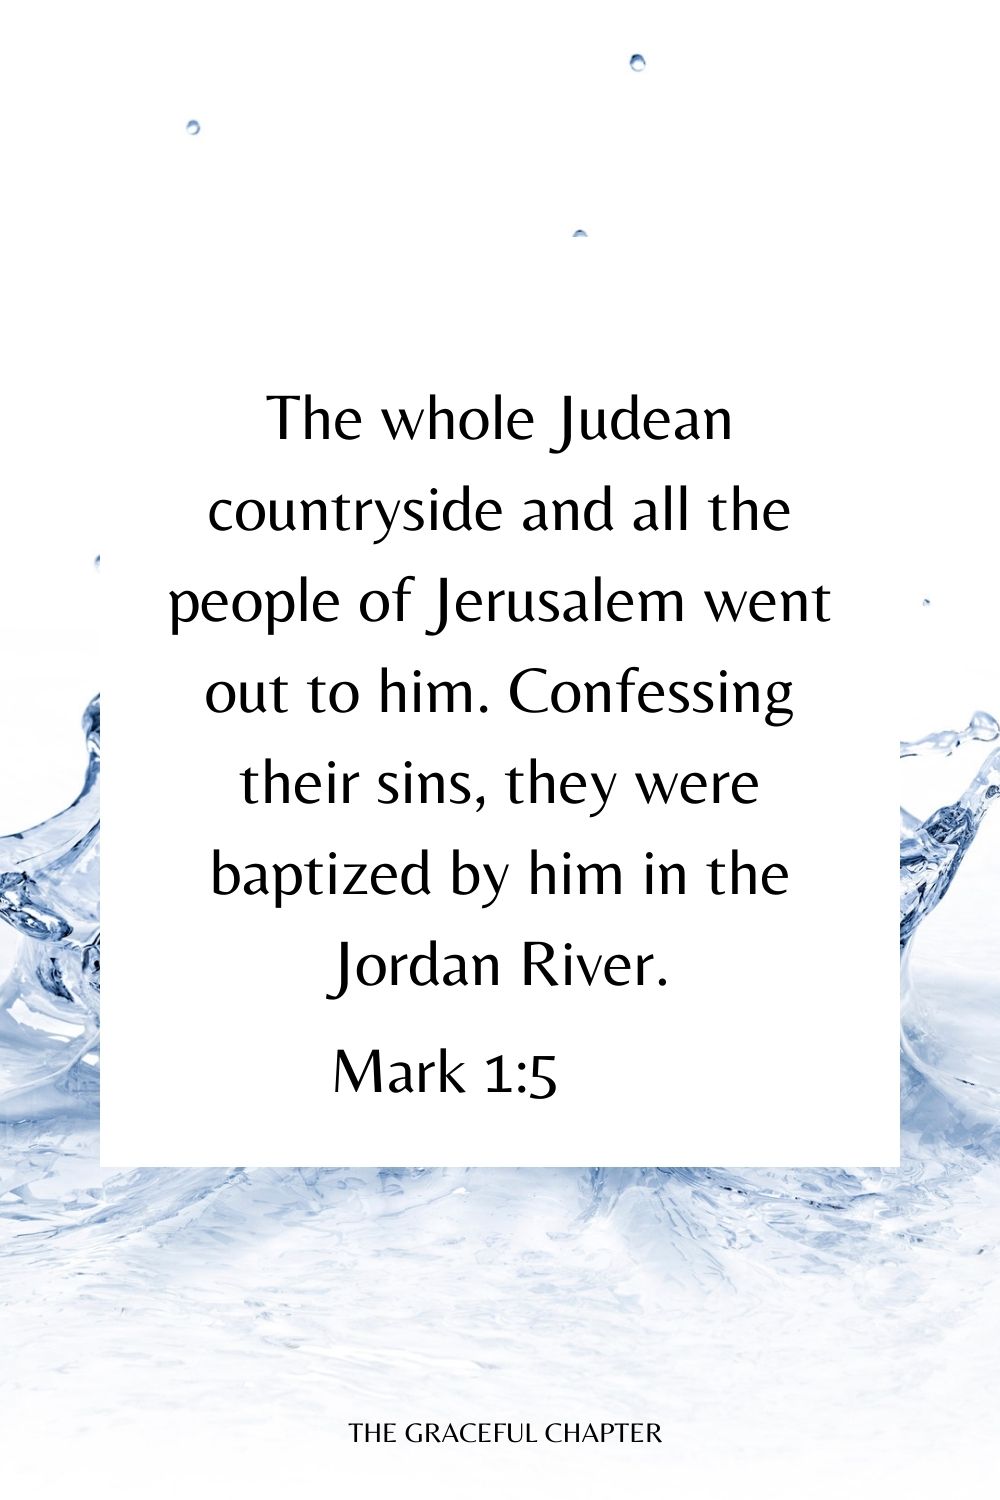 The whole Judean countryside and all the people of Jerusalem went out to him. Confessing their sins, they were baptized by him in the Jordan River. Mark 1:5